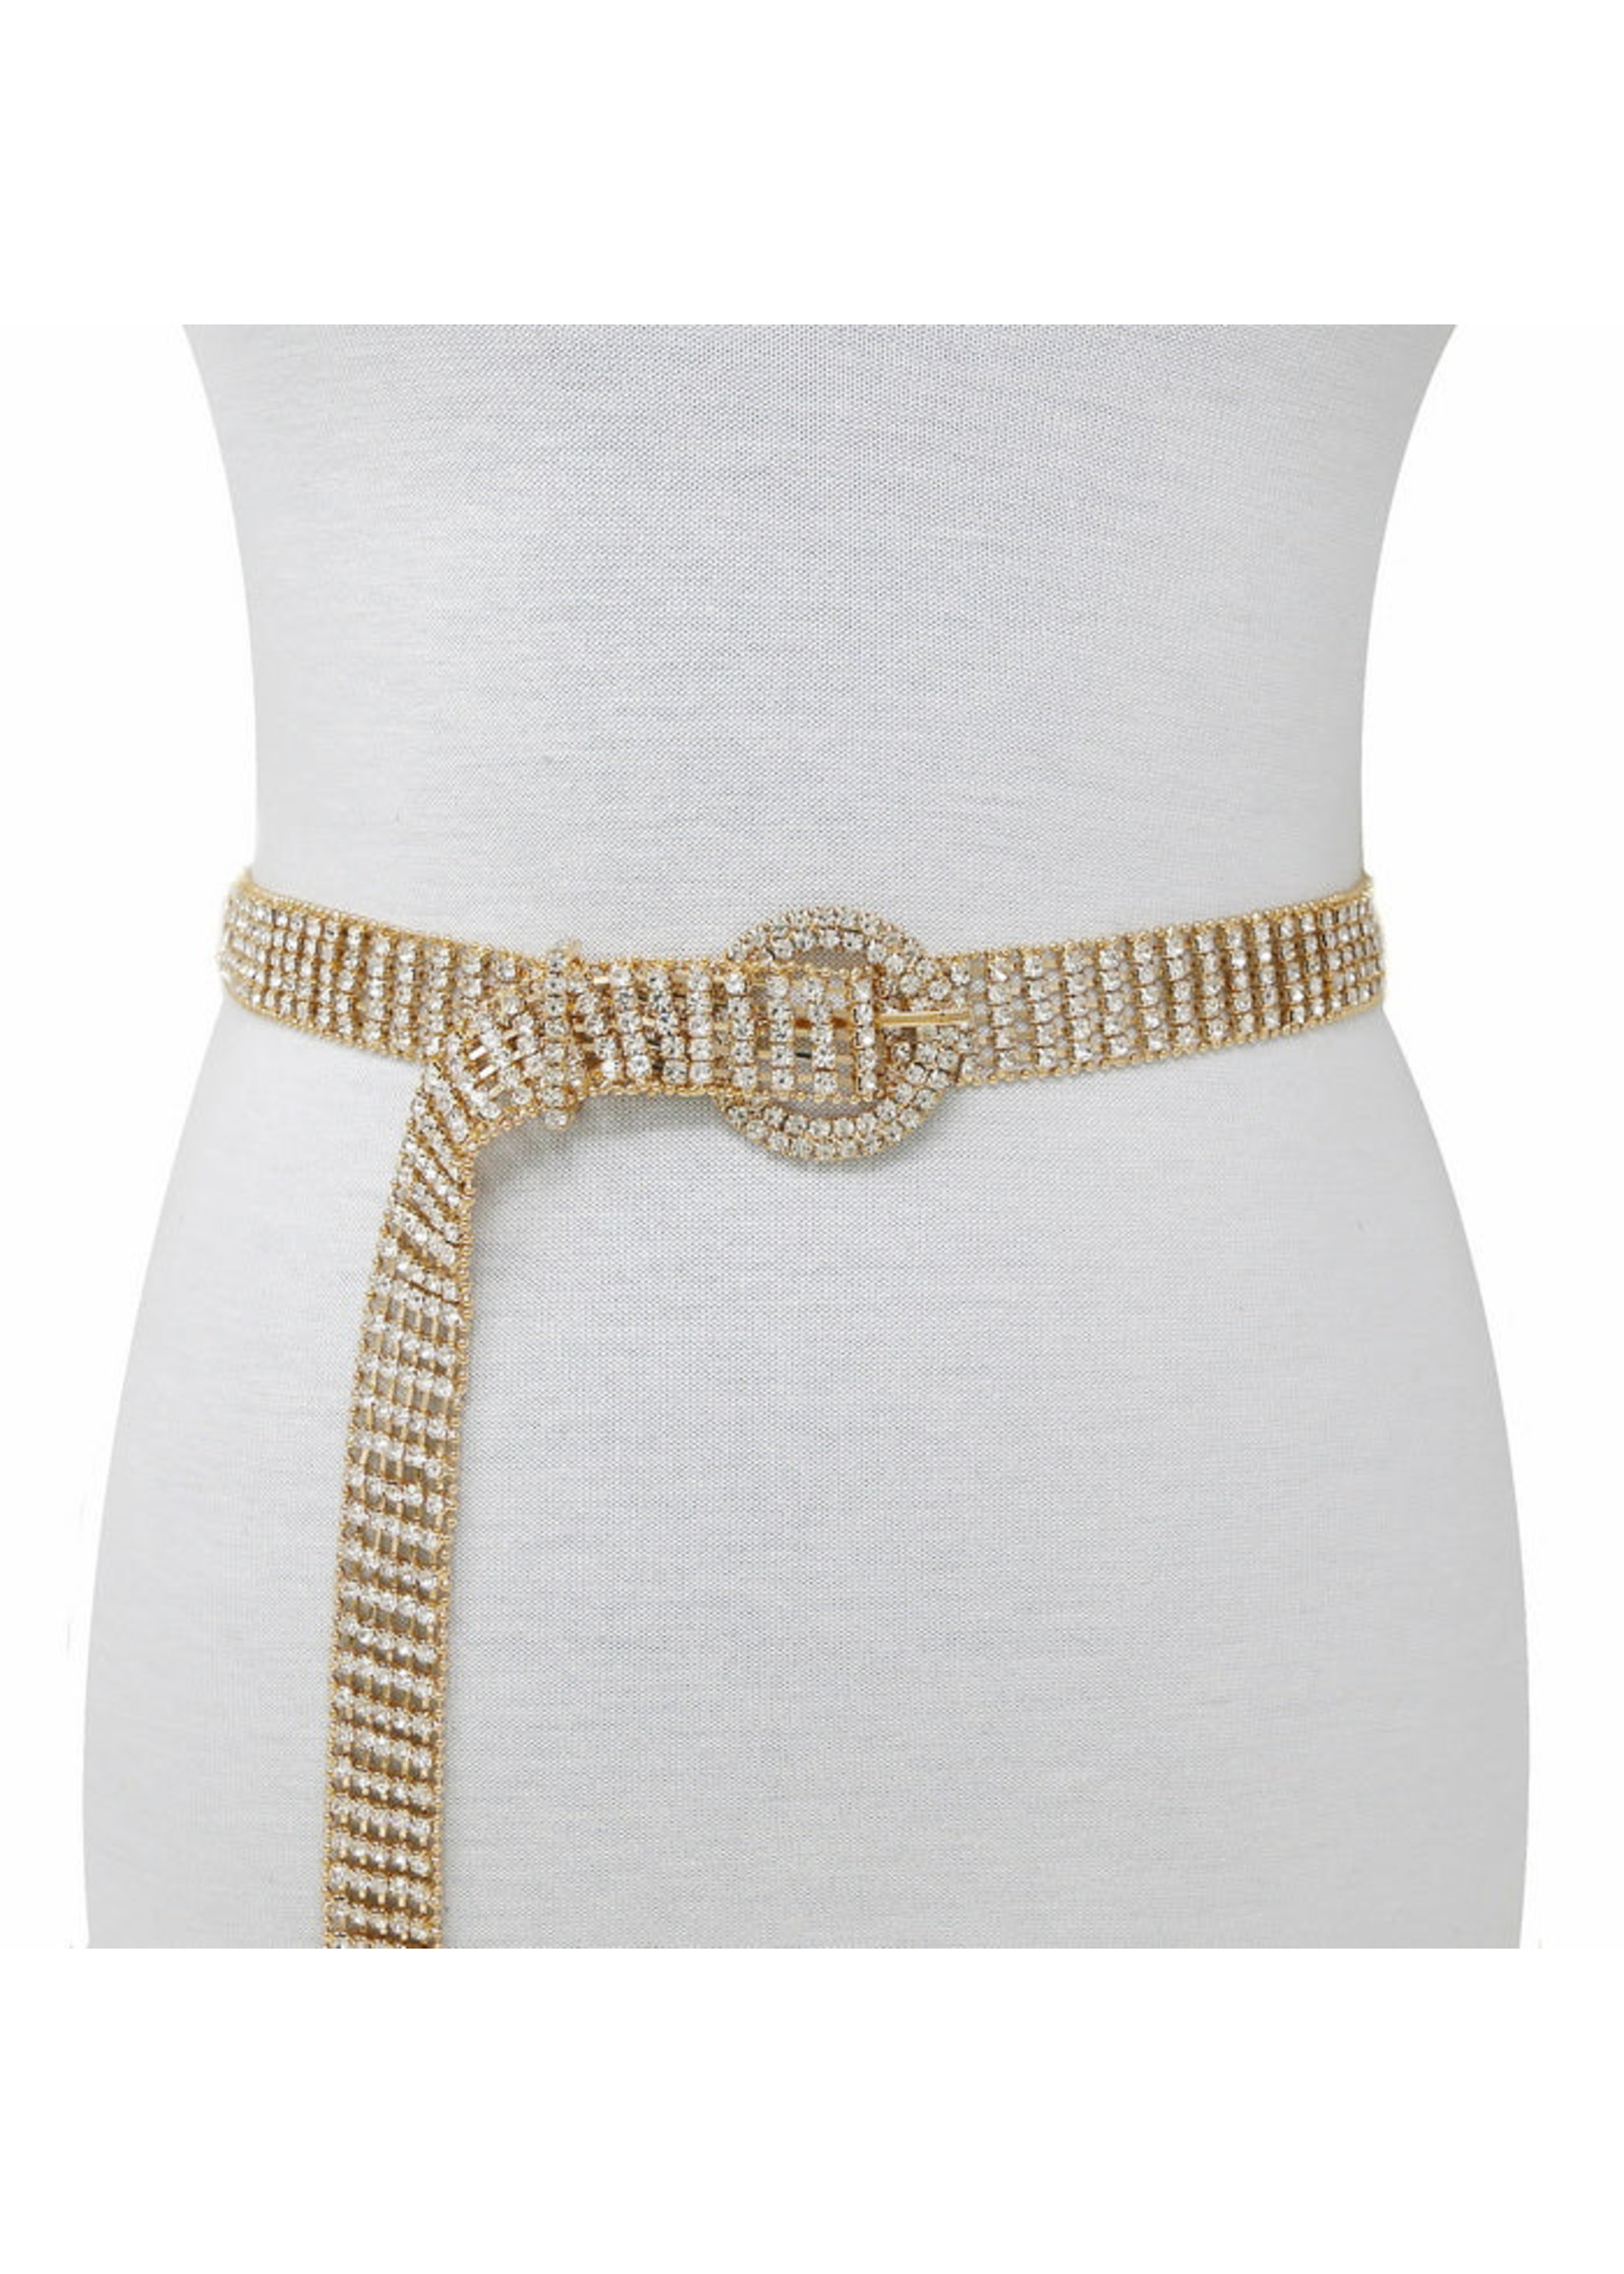 Shimmer and Shine 4 Row Belt - Boutique Twenty Two